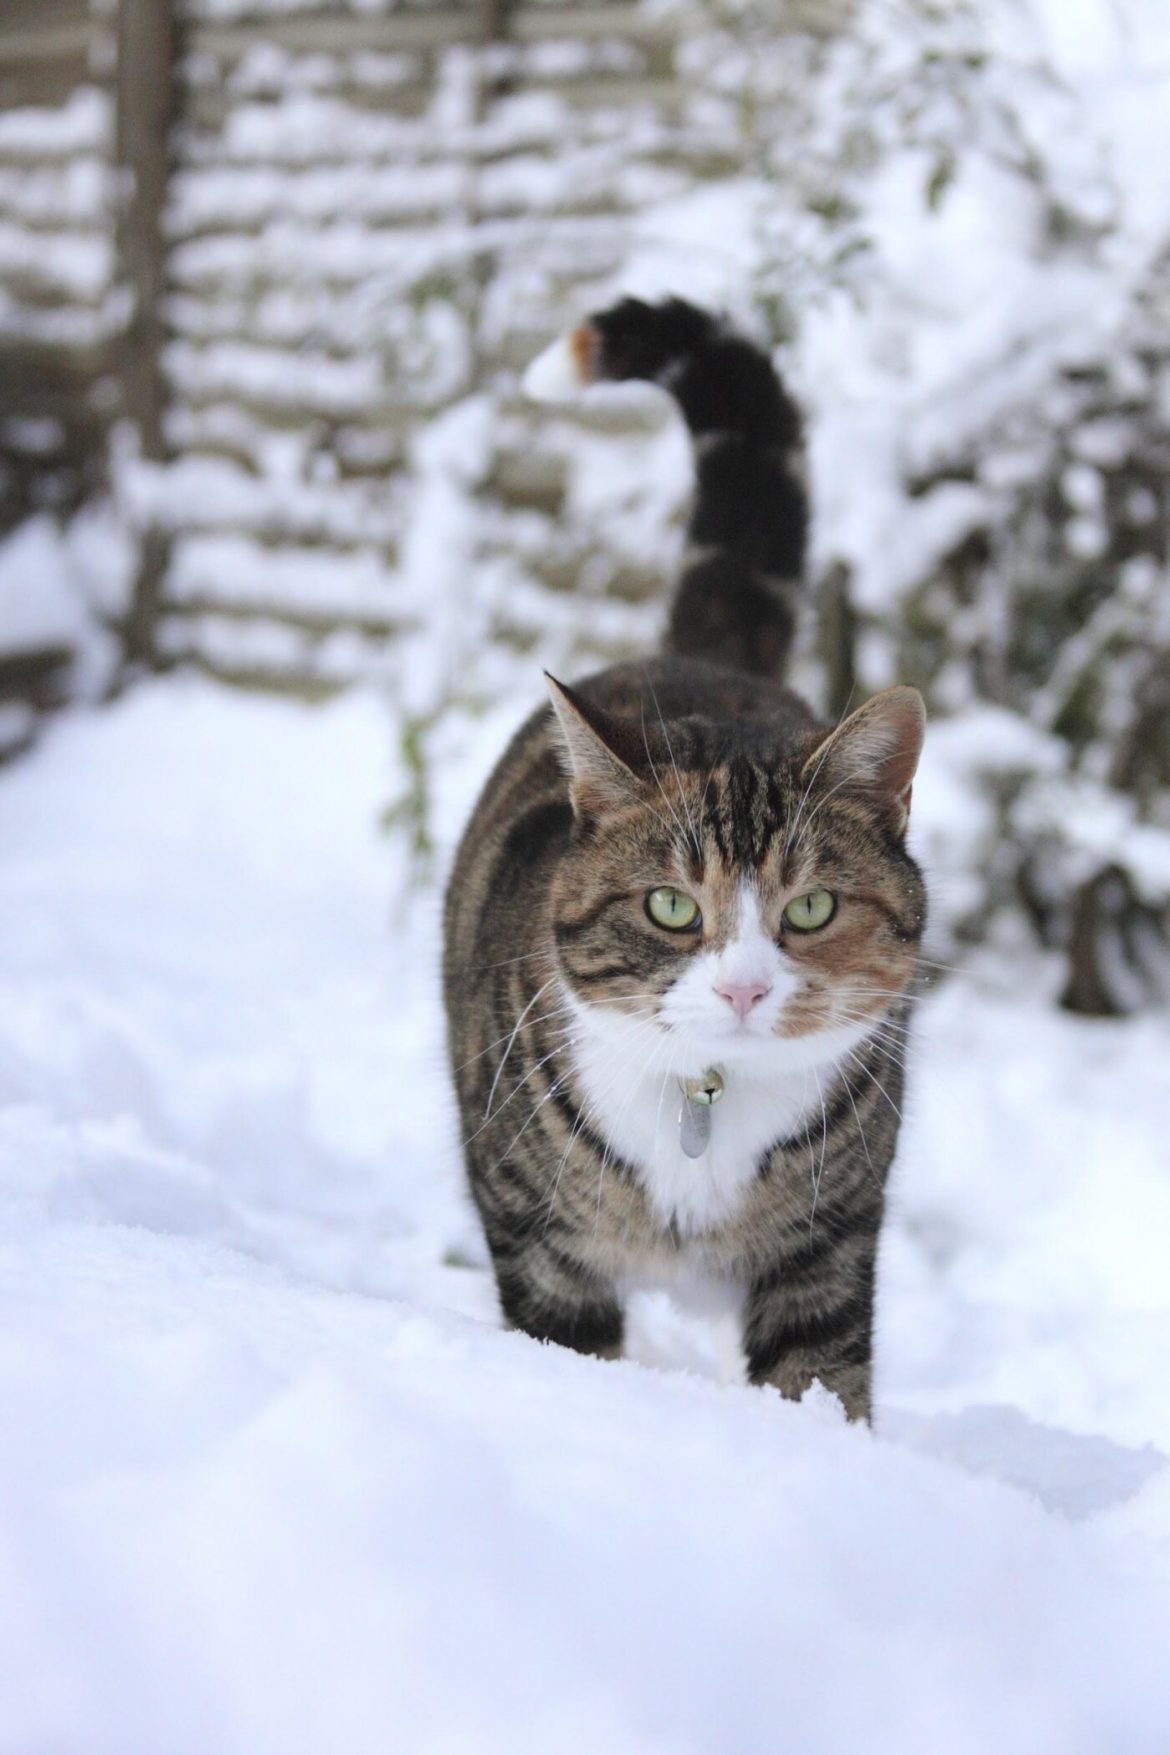 15 Tips to Keep Animals Safe in the Cold